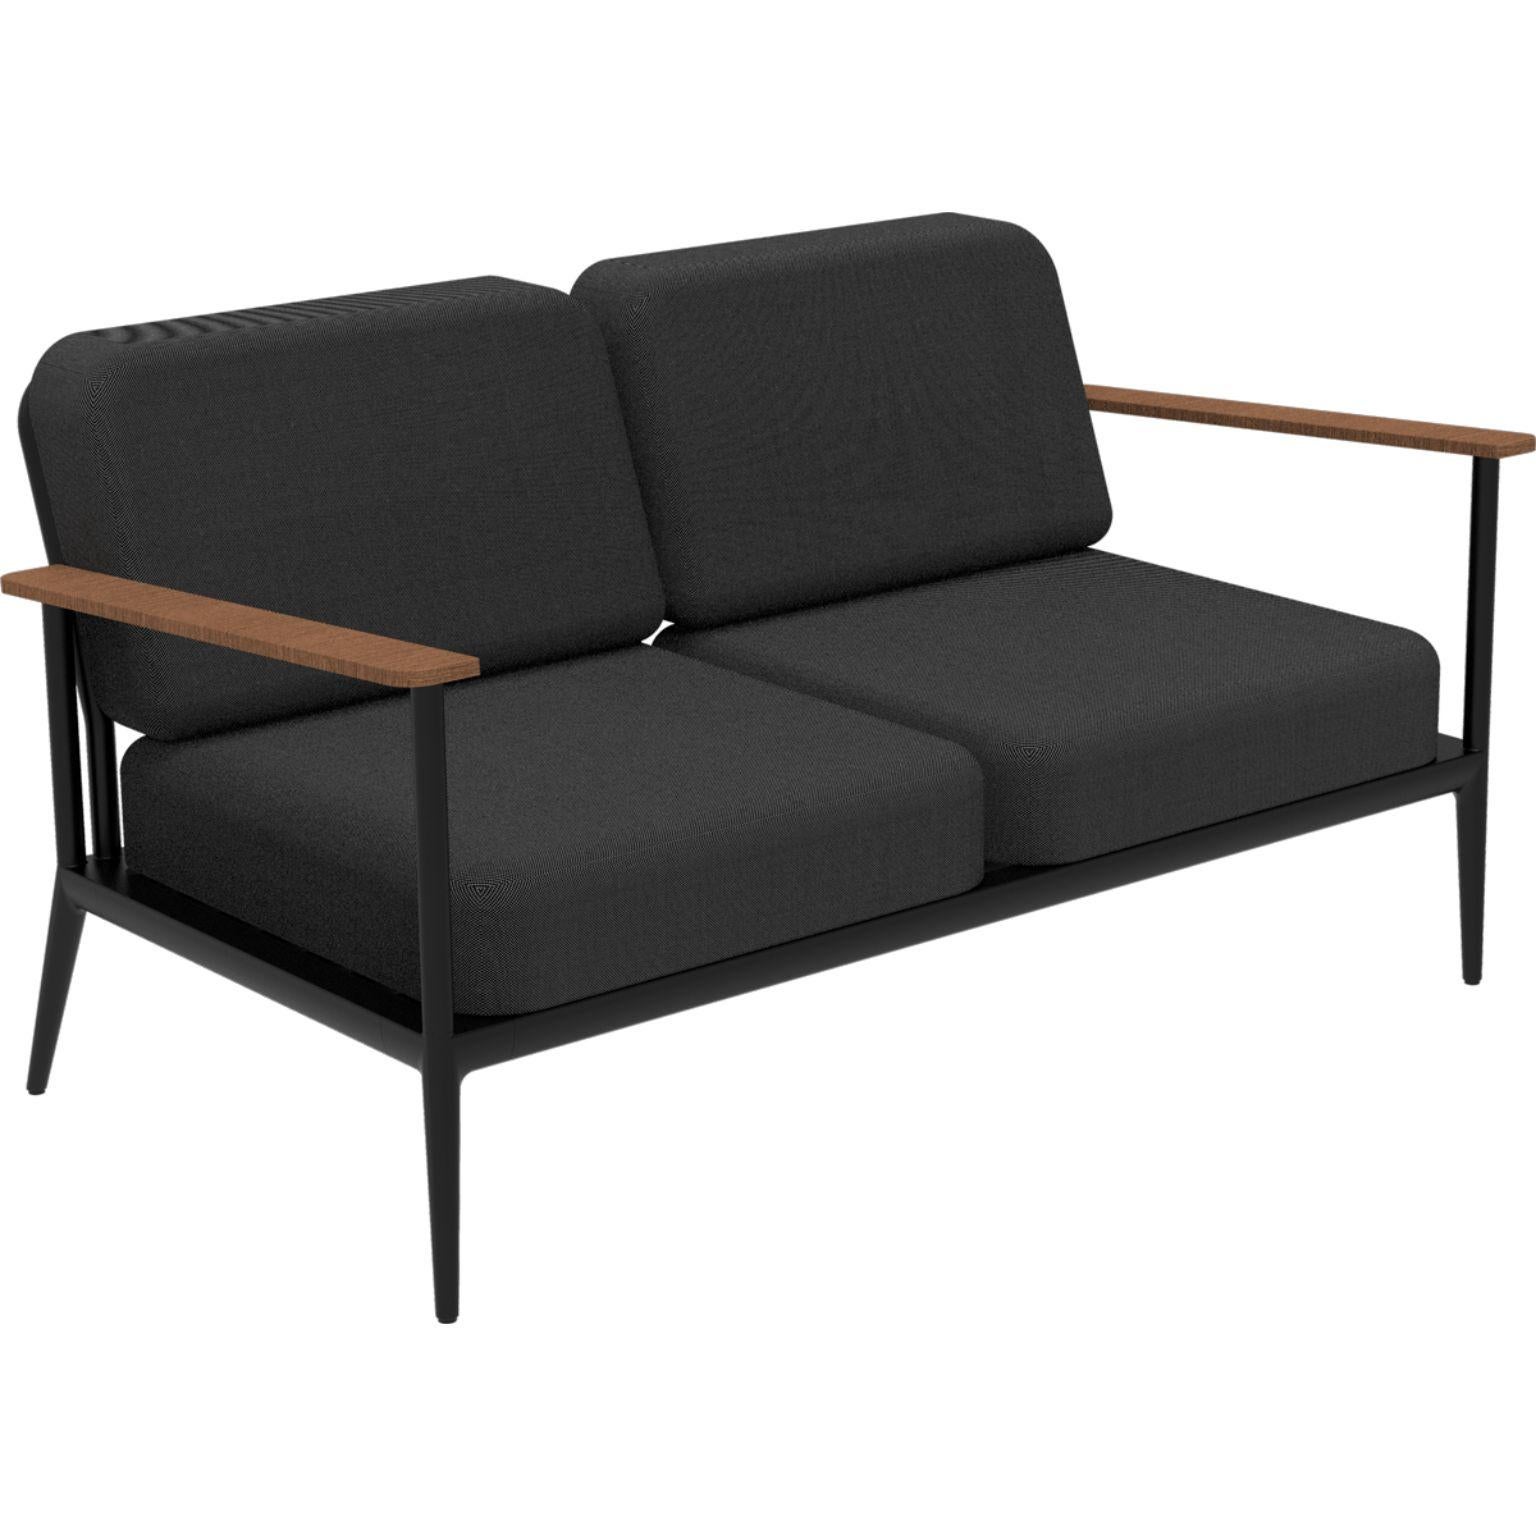 Nature black sofa by MOWEE
Dimensions: D85 x W151 x H81 cm (seat height 42 cm).
Material: Aluminum, upholstery and Iroko Wood.
Weight: 32 kg.
Also available in different colors and finishes.

An unmistakable collection for its beauty and